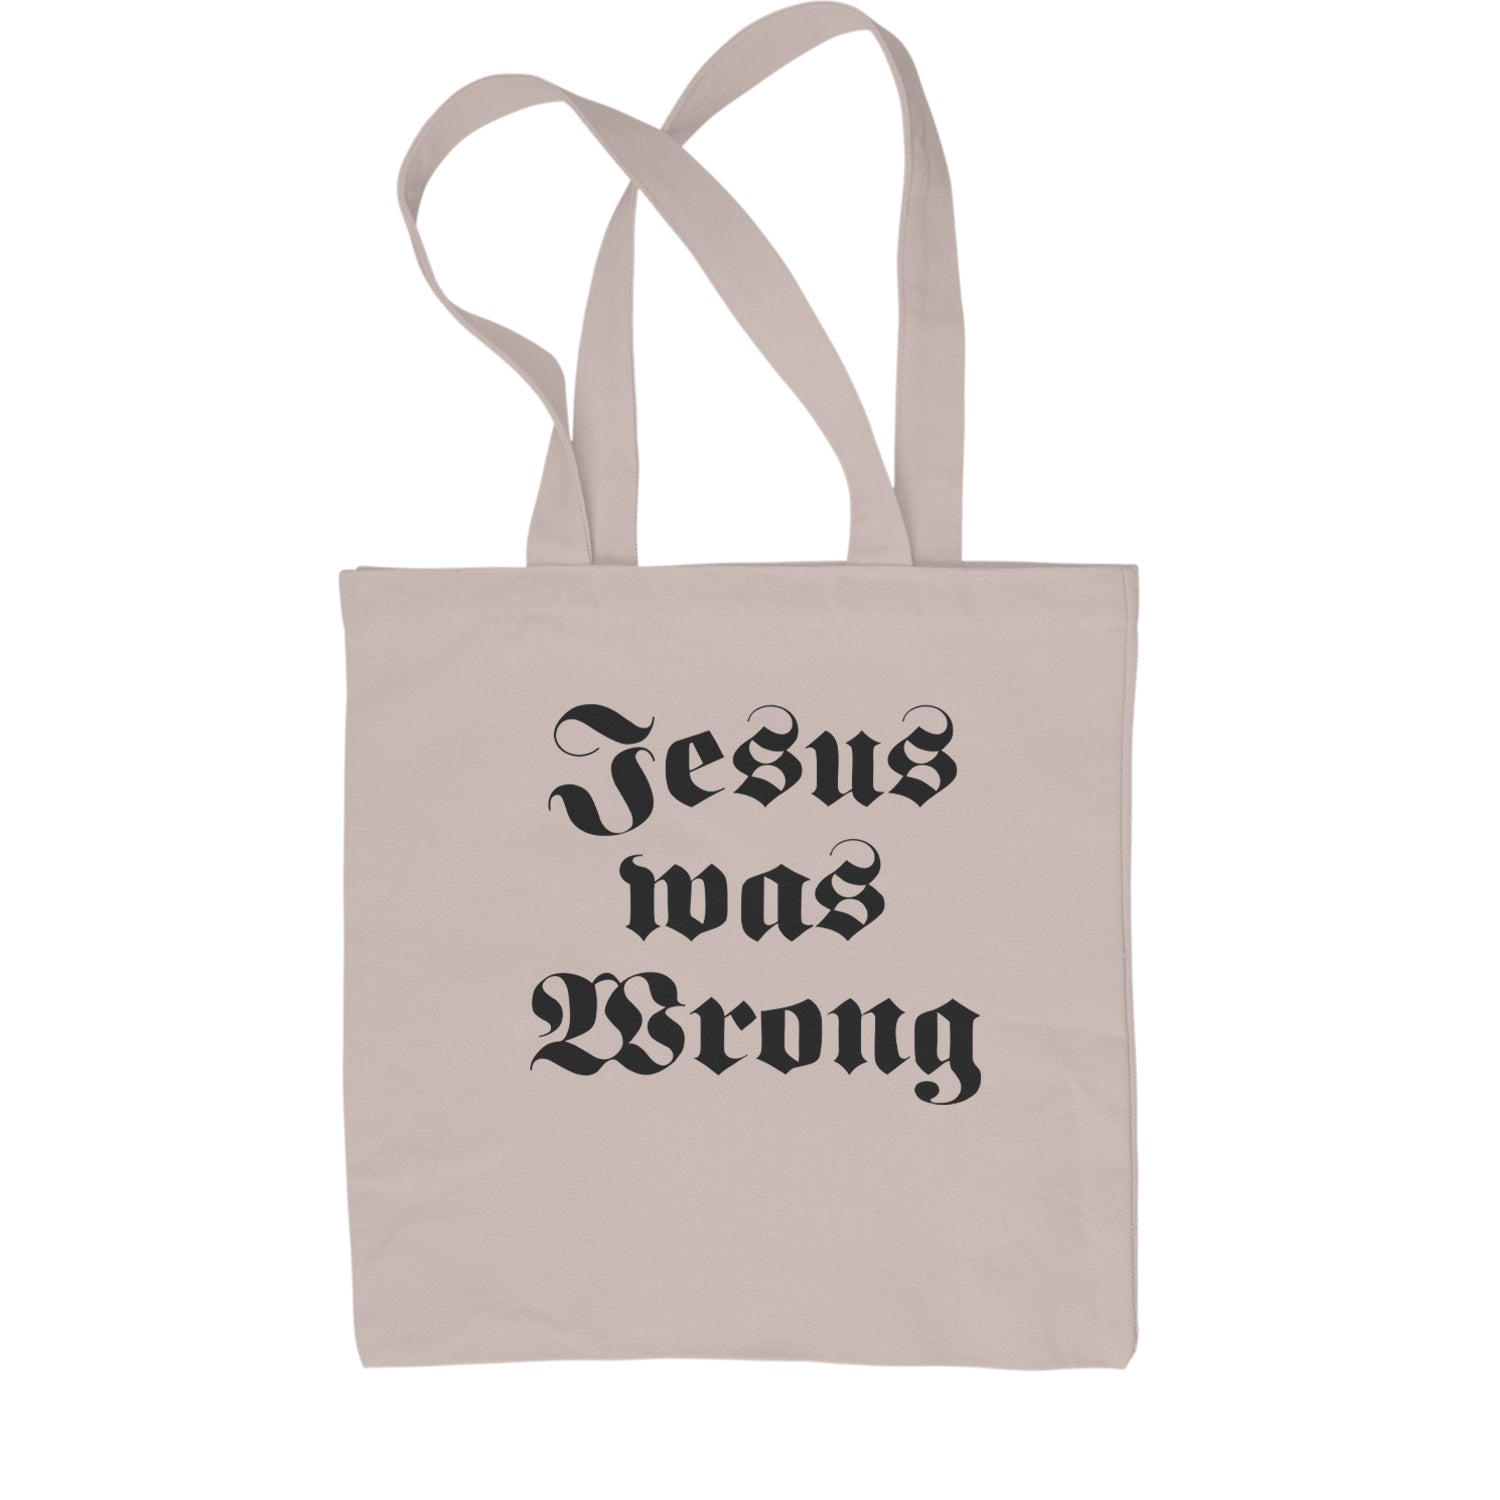 Jesus Was Wrong Little Miss Sunshine Shopping Tote Bag breslin, dano, movie, paul, shine, shirt, sun by Expression Tees